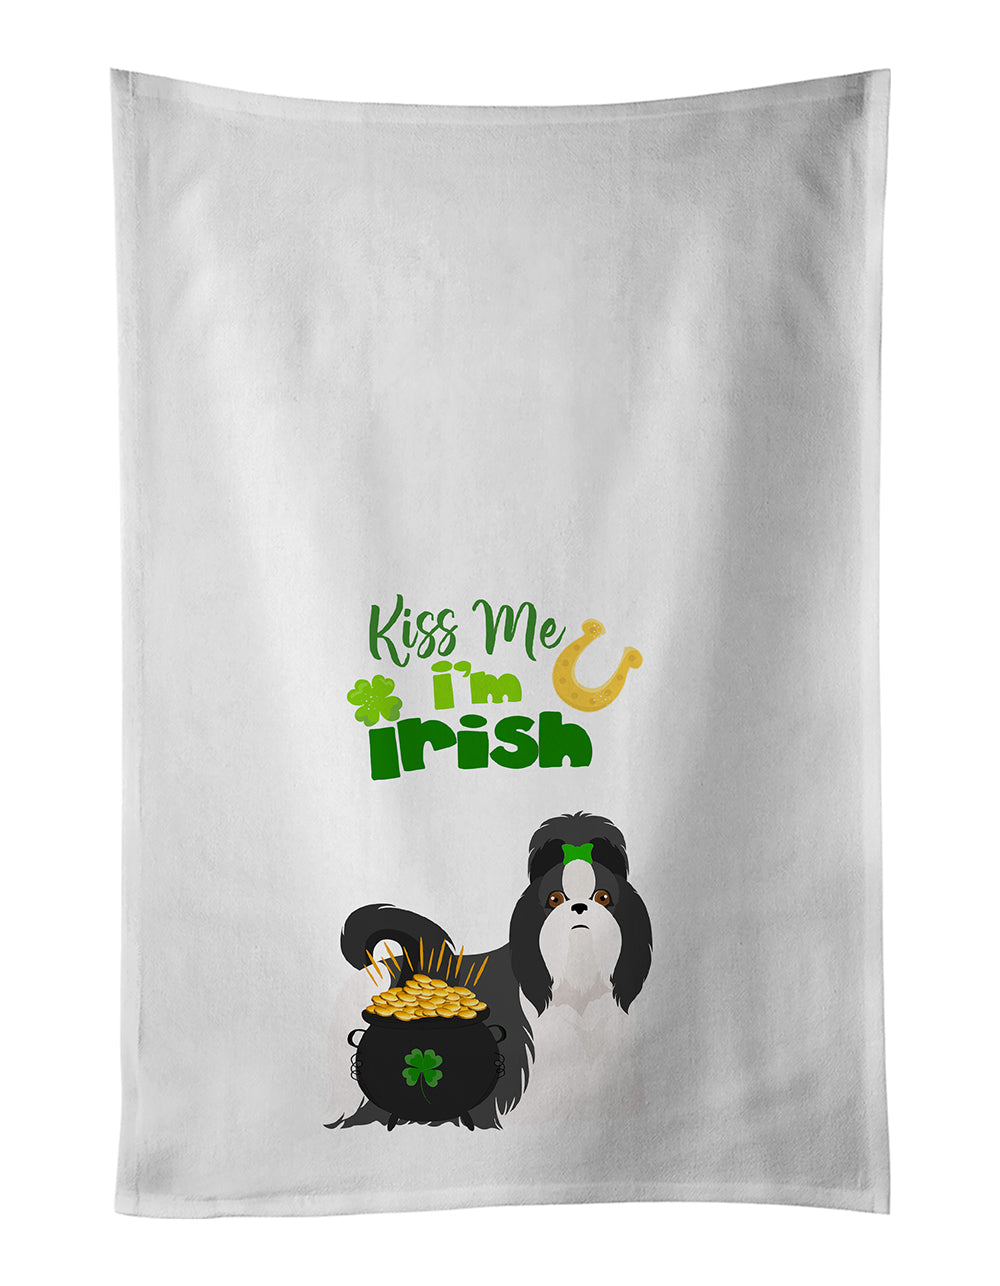 Buy this Black and White Shih Tzu St. Patrick's Day White Kitchen Towel Set of 2 Dish Towels